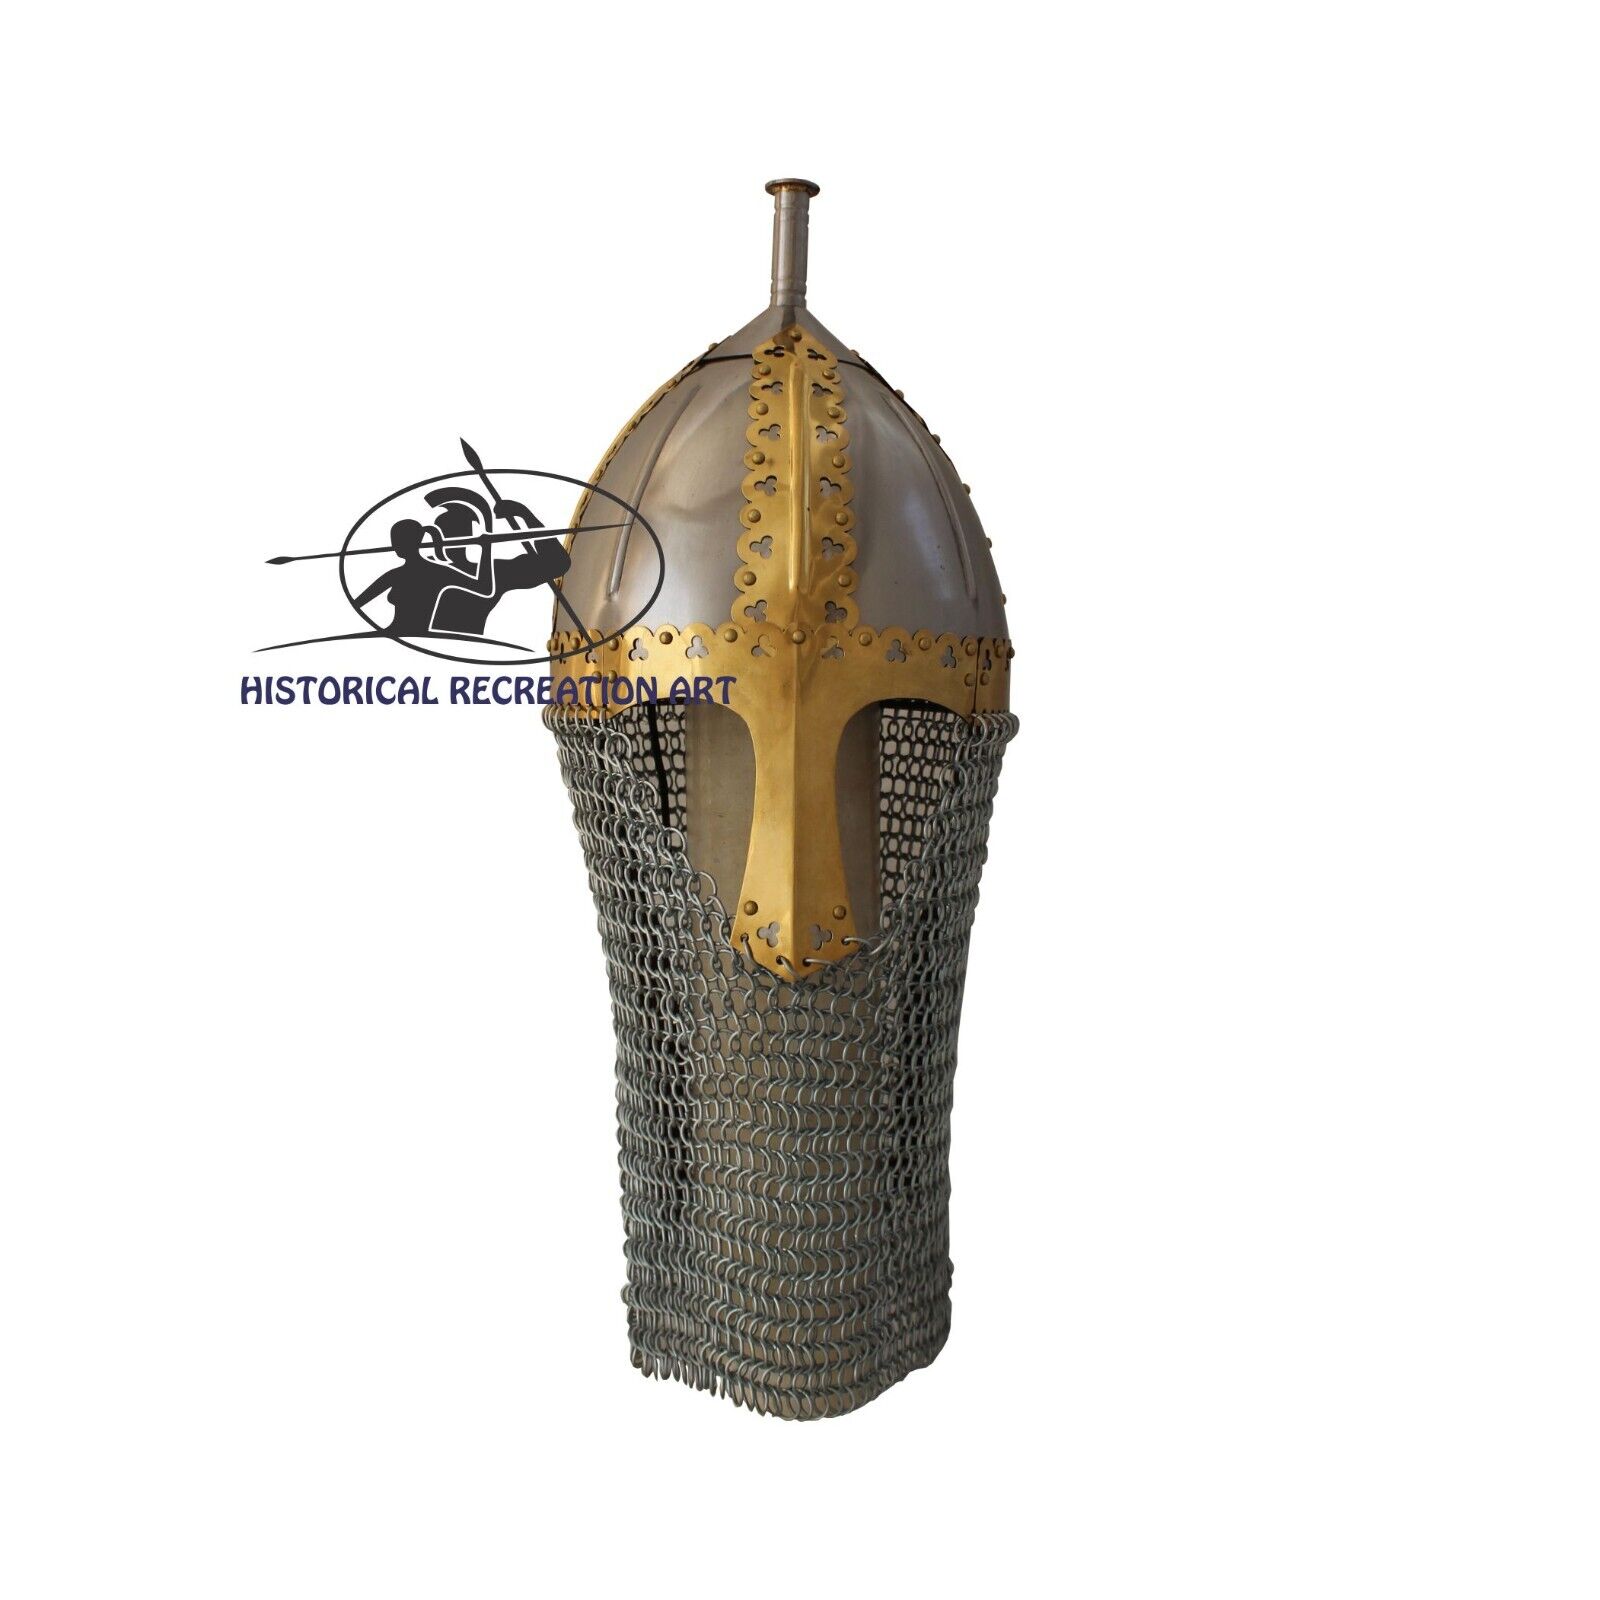 Gnezdovo Viking Helmet With Handmade Lining Design Brass With Butted Chainmail |